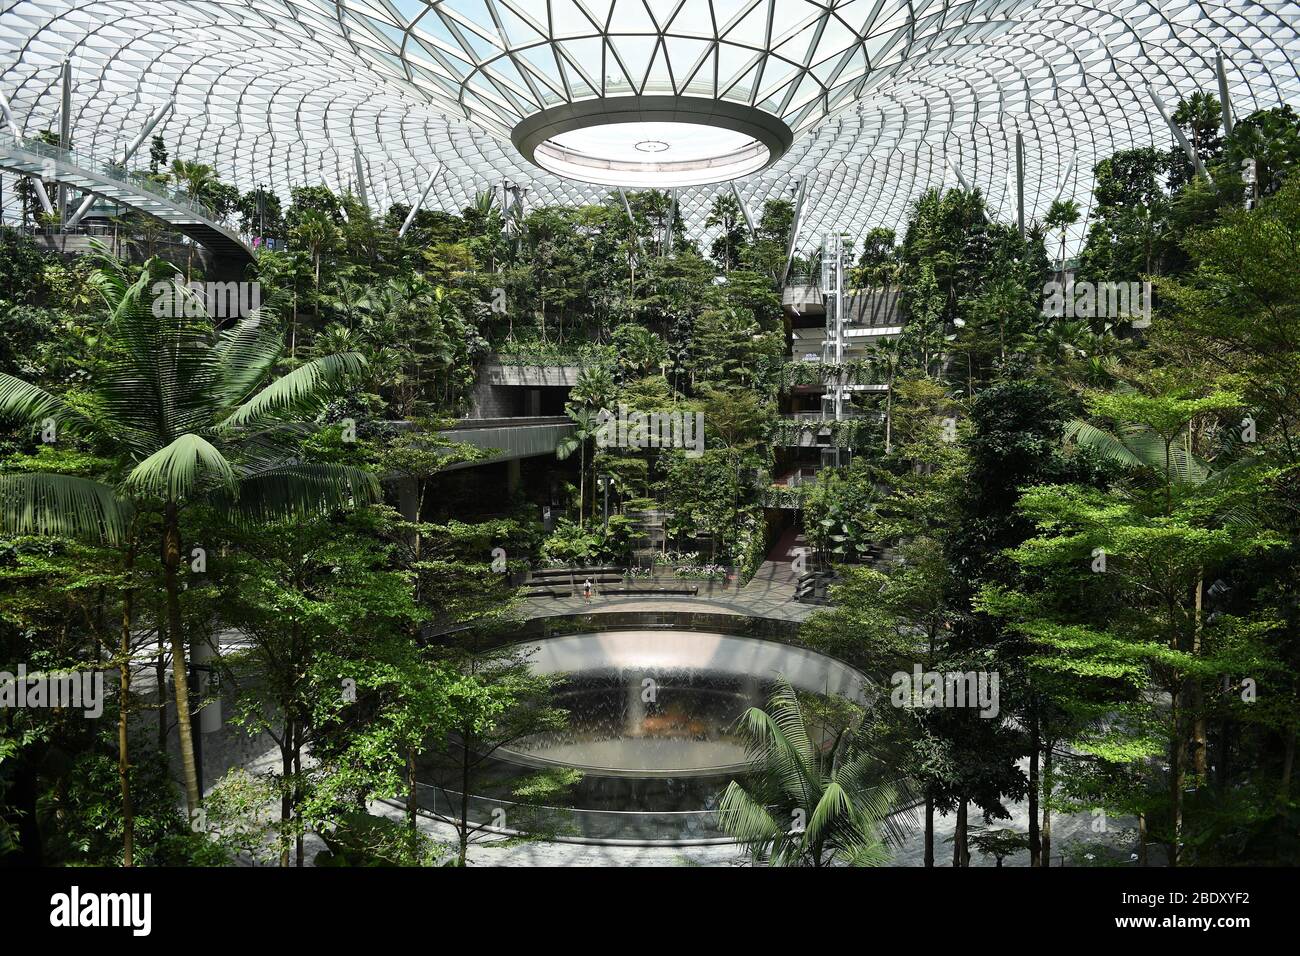 APR 10, 2020 - Covid-19: No waterfall at Jewel Changi Airport after Singapore government has announced Circuit Breaker measurement take effect from 07 Apr to 04 May of the COVID19 novel coronavirus Stock Photo